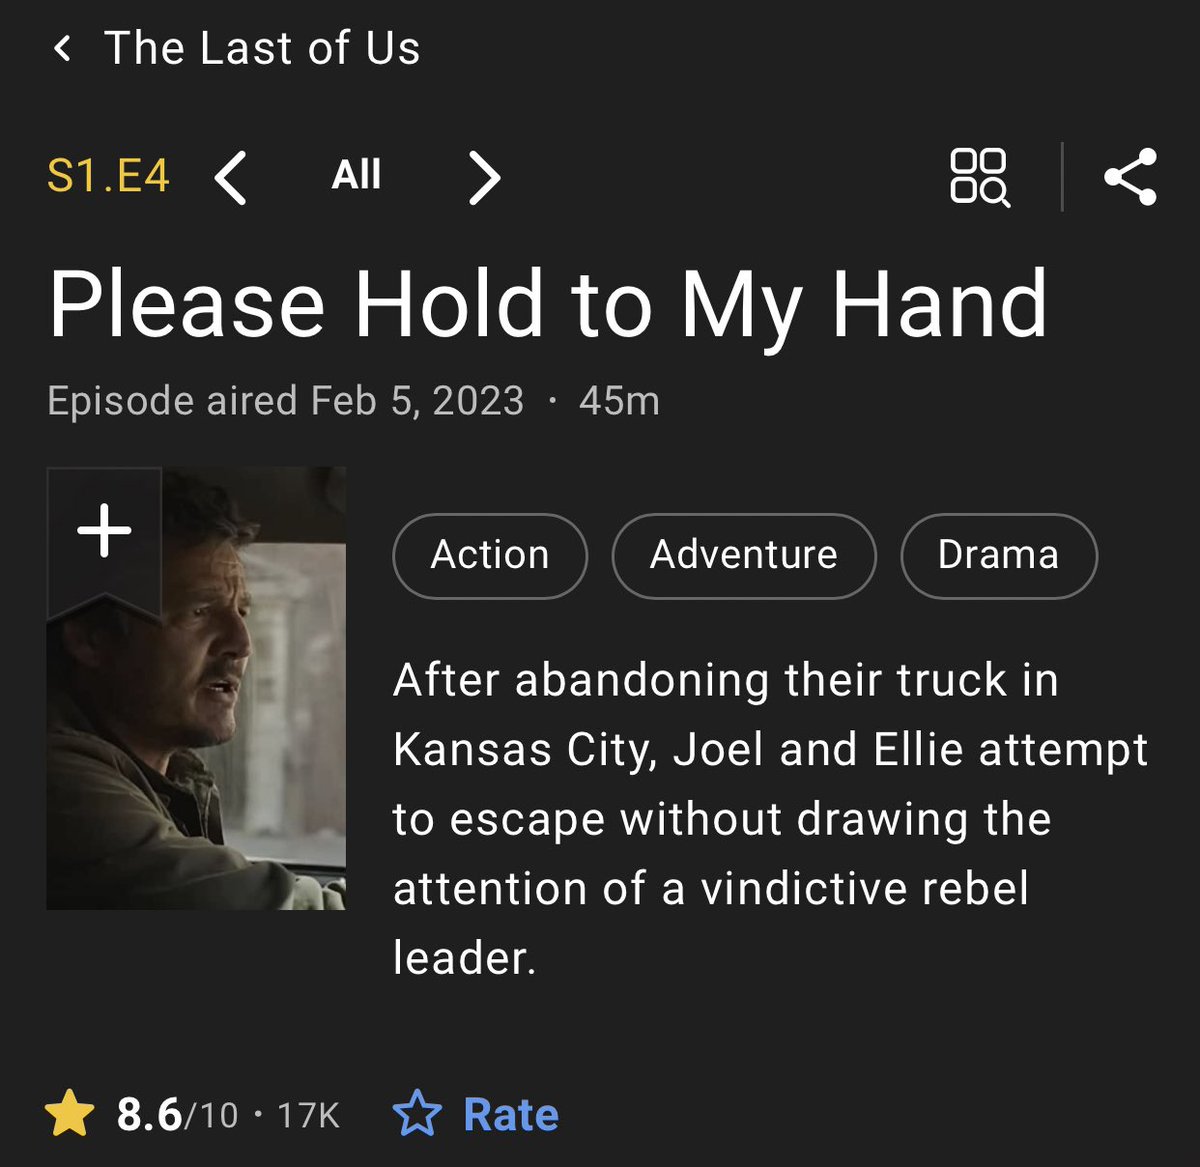 DomTheBomb on X: The Last of Us HBO Episode 4 Please Hold to My Hand sits  at 8.6/10 ⭐️ after almost 17.1K reviews on IMDb  / X